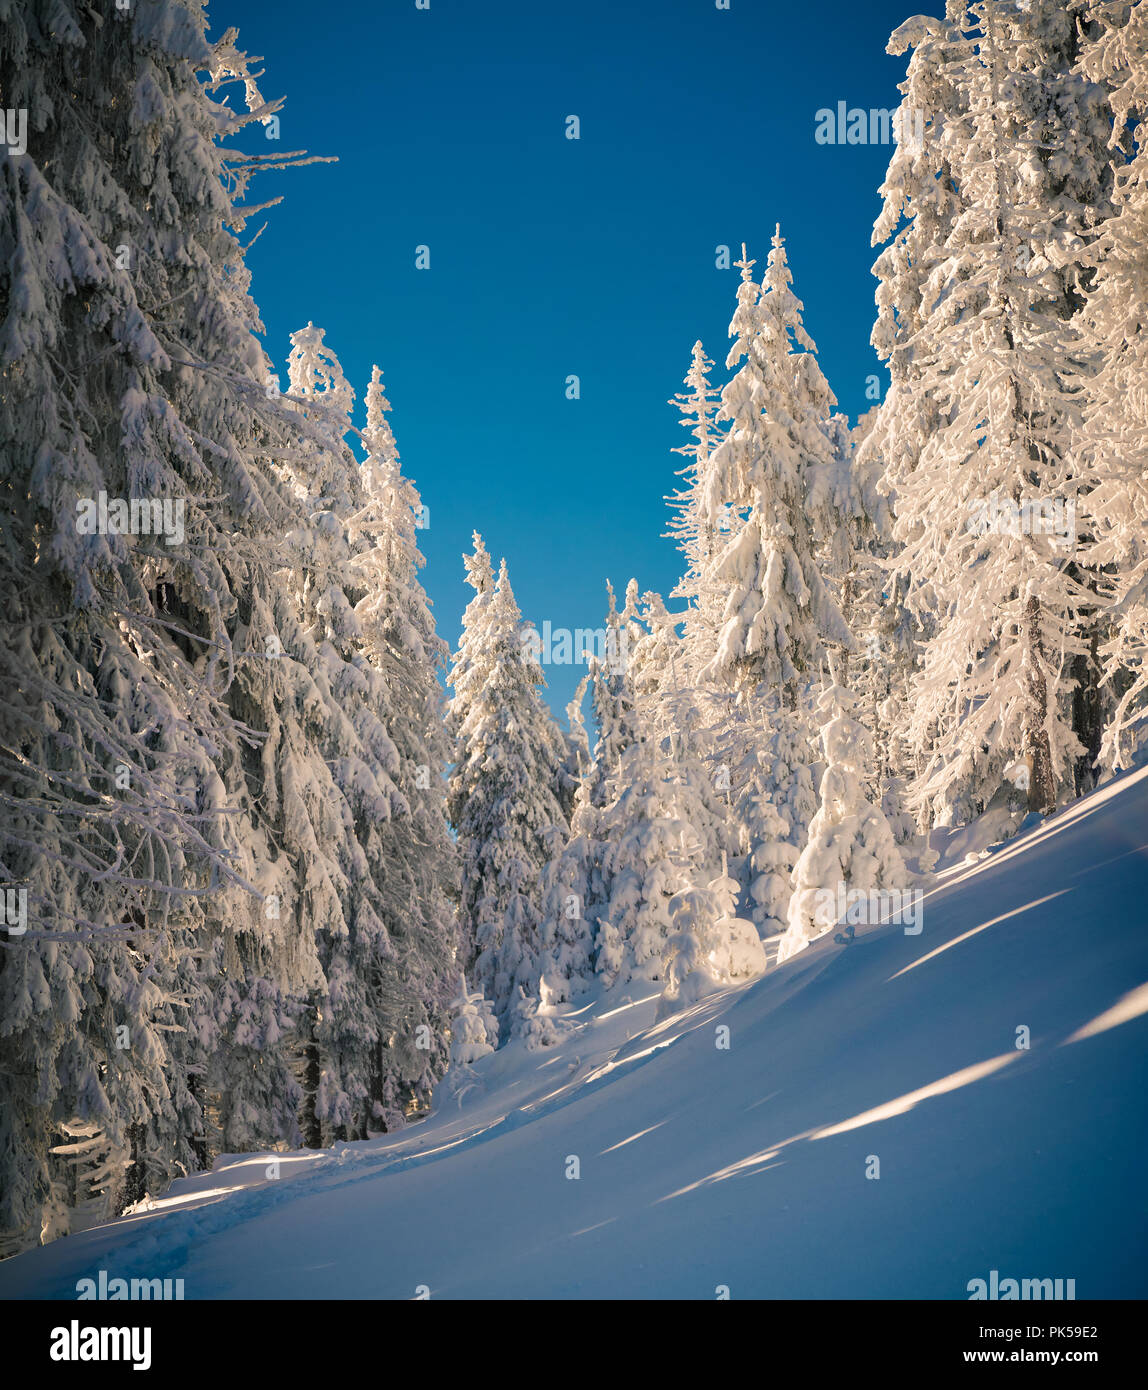 Sunny winter morning in the mountain forest. Happy New Year! Stock Photo